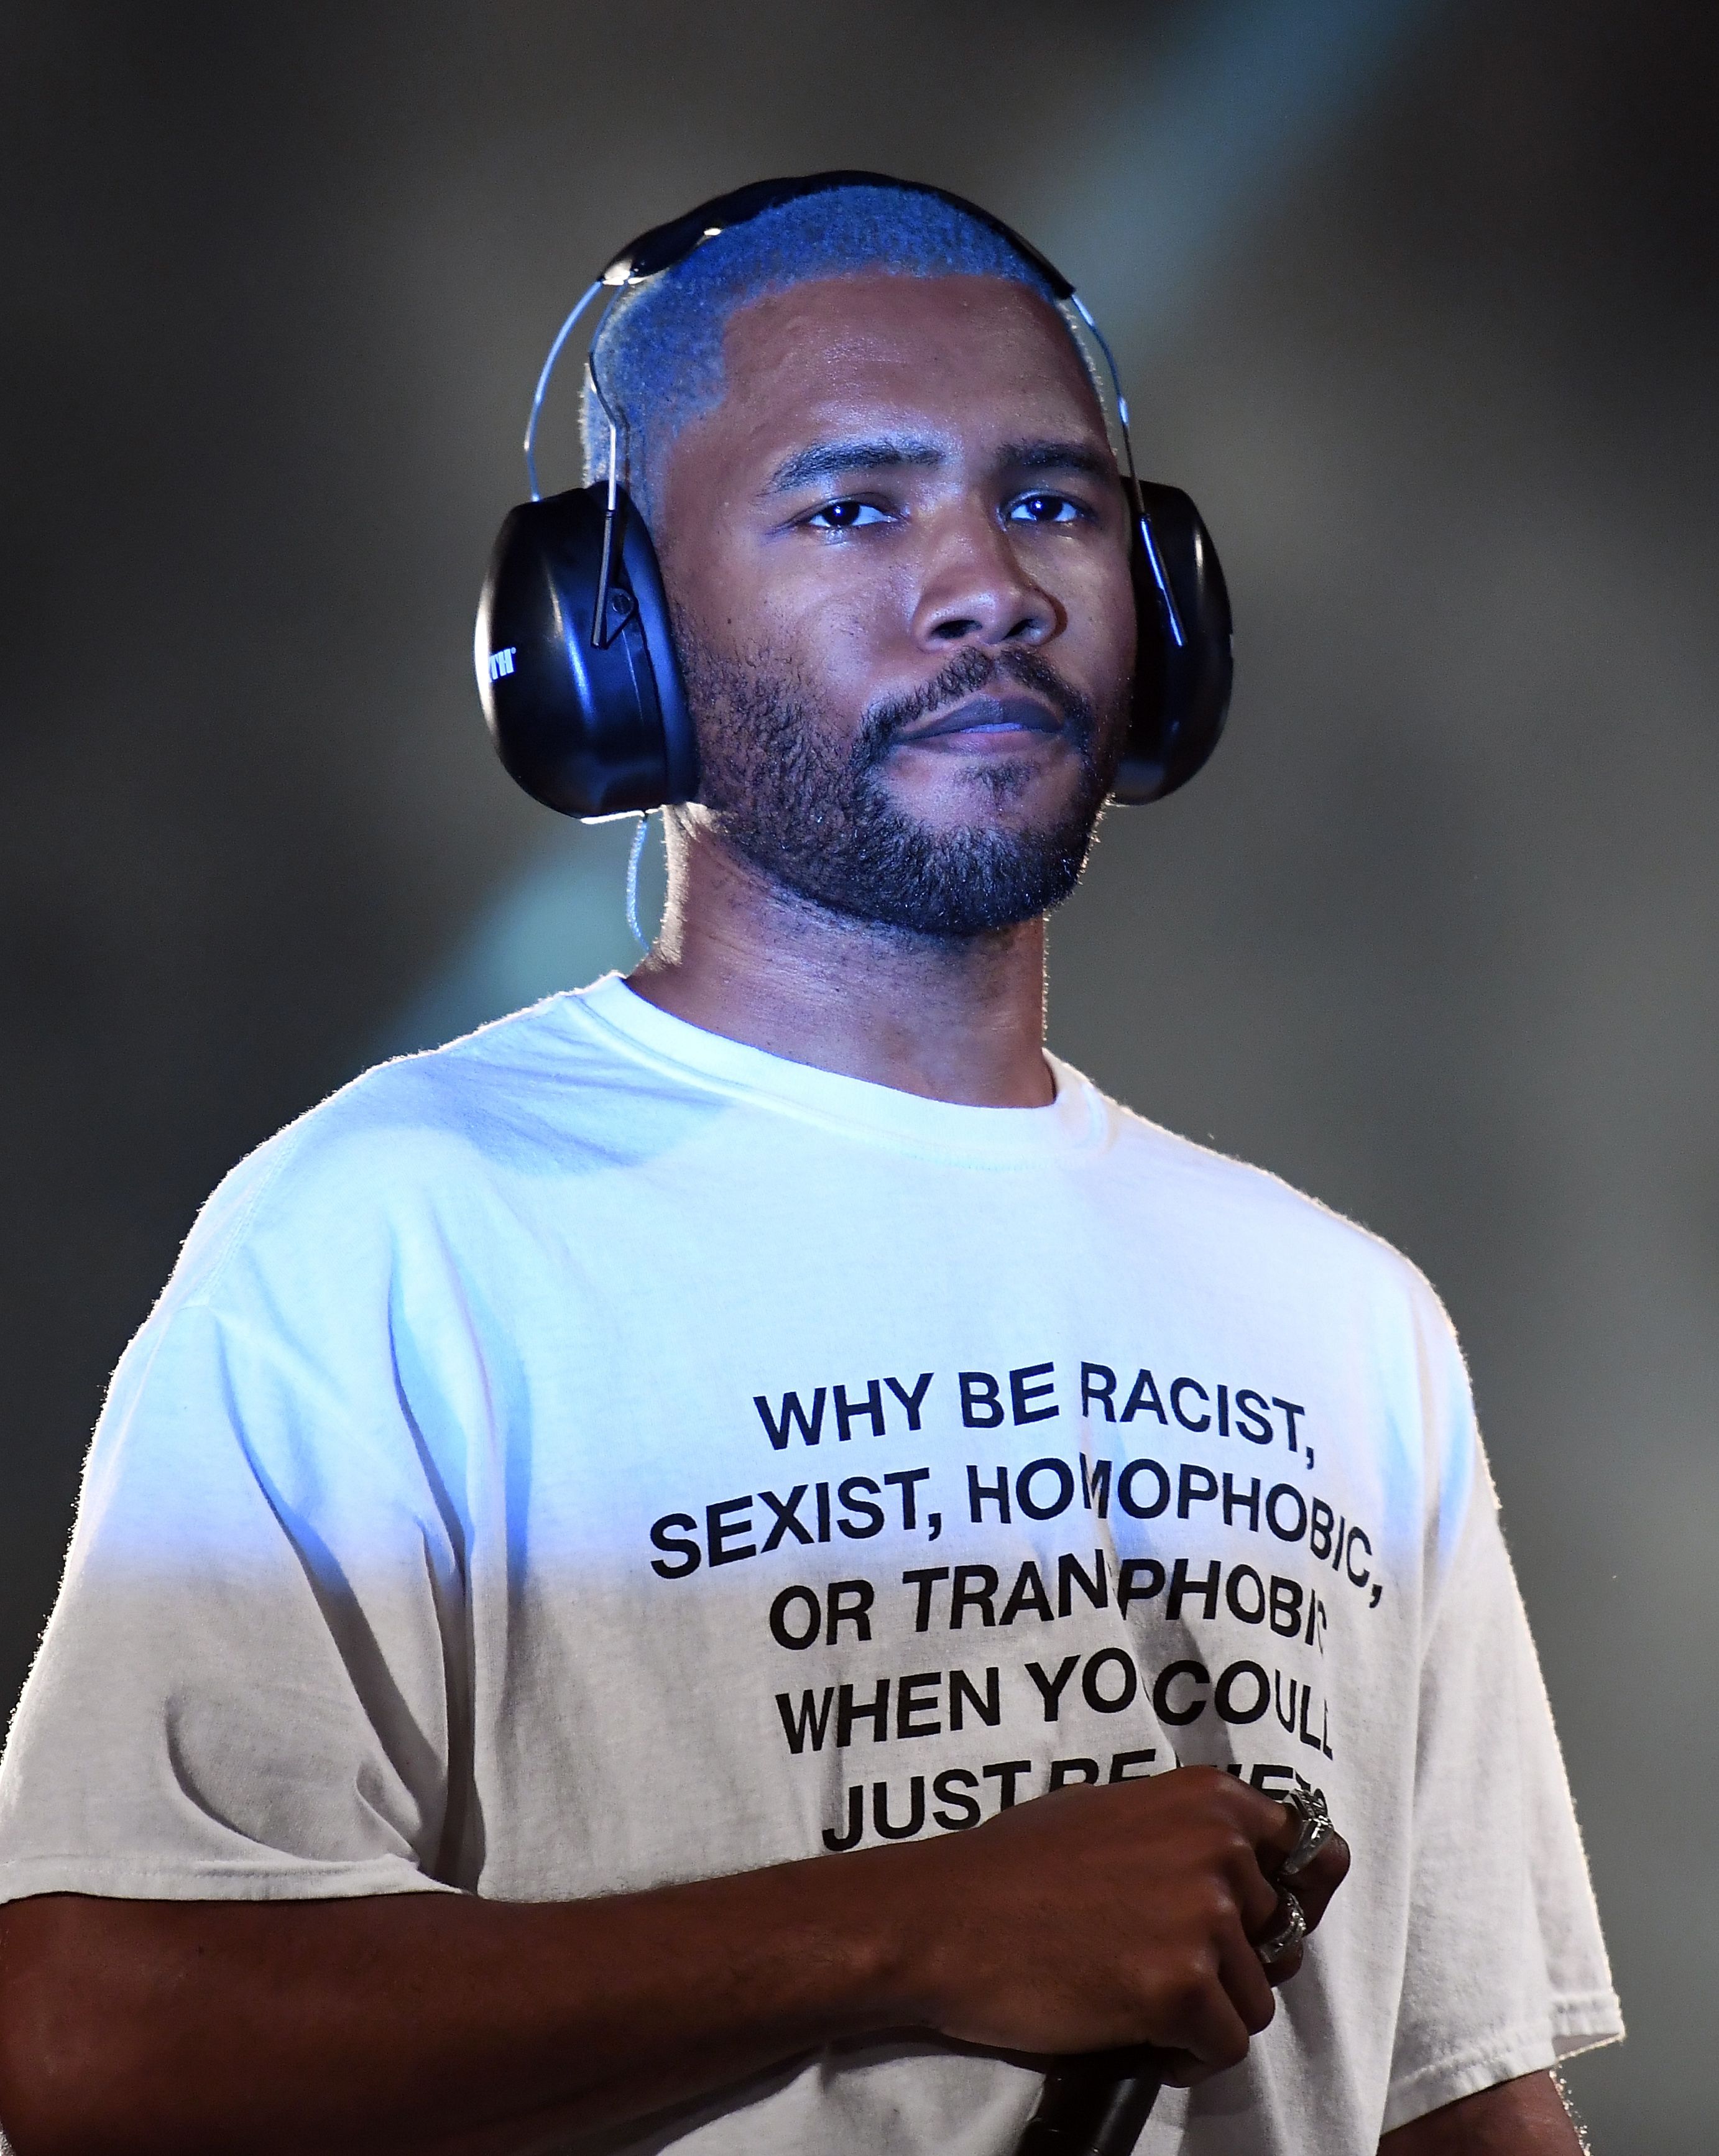 The Real Story Behind Your Favorite Social Justice Tee